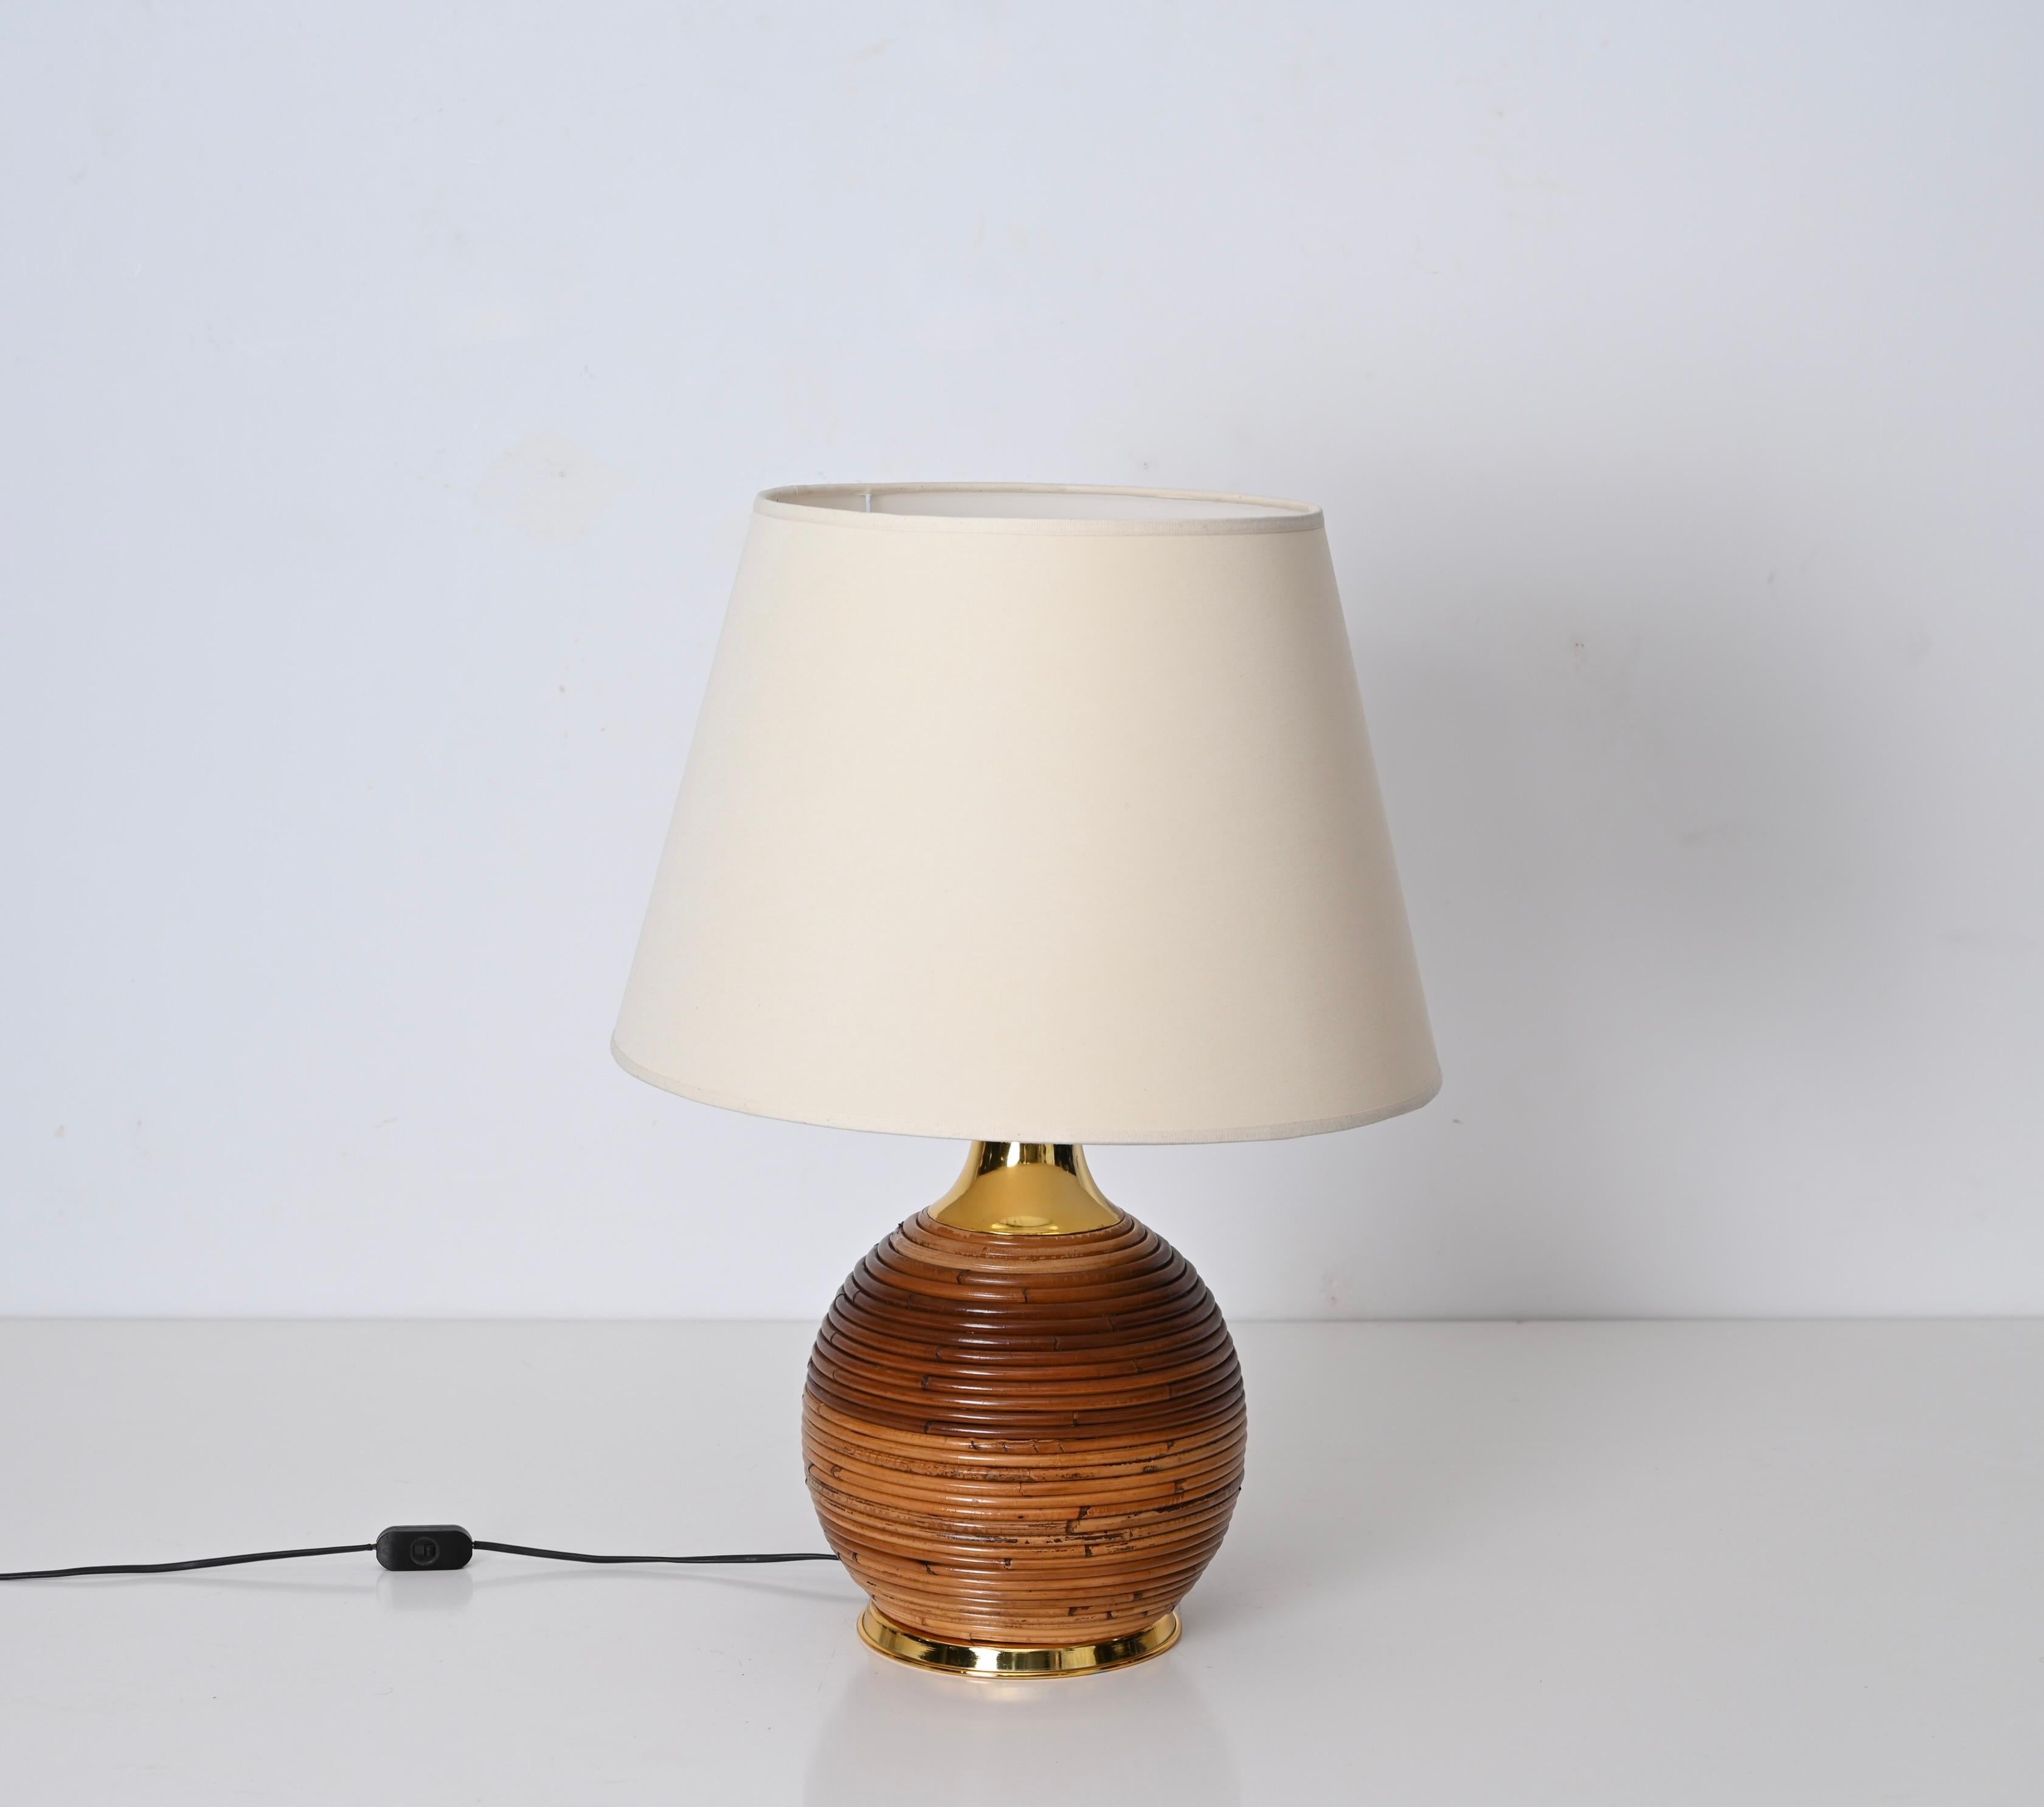 Gorgeous midcentury table lamp in rattan and gilt metal. This fantastic piece was designed by Vivai del Sud in Italy in the 1970s. 

This round lamp features a body made in a beautiful spiral of curved rattan, the base and the neck are in gilt